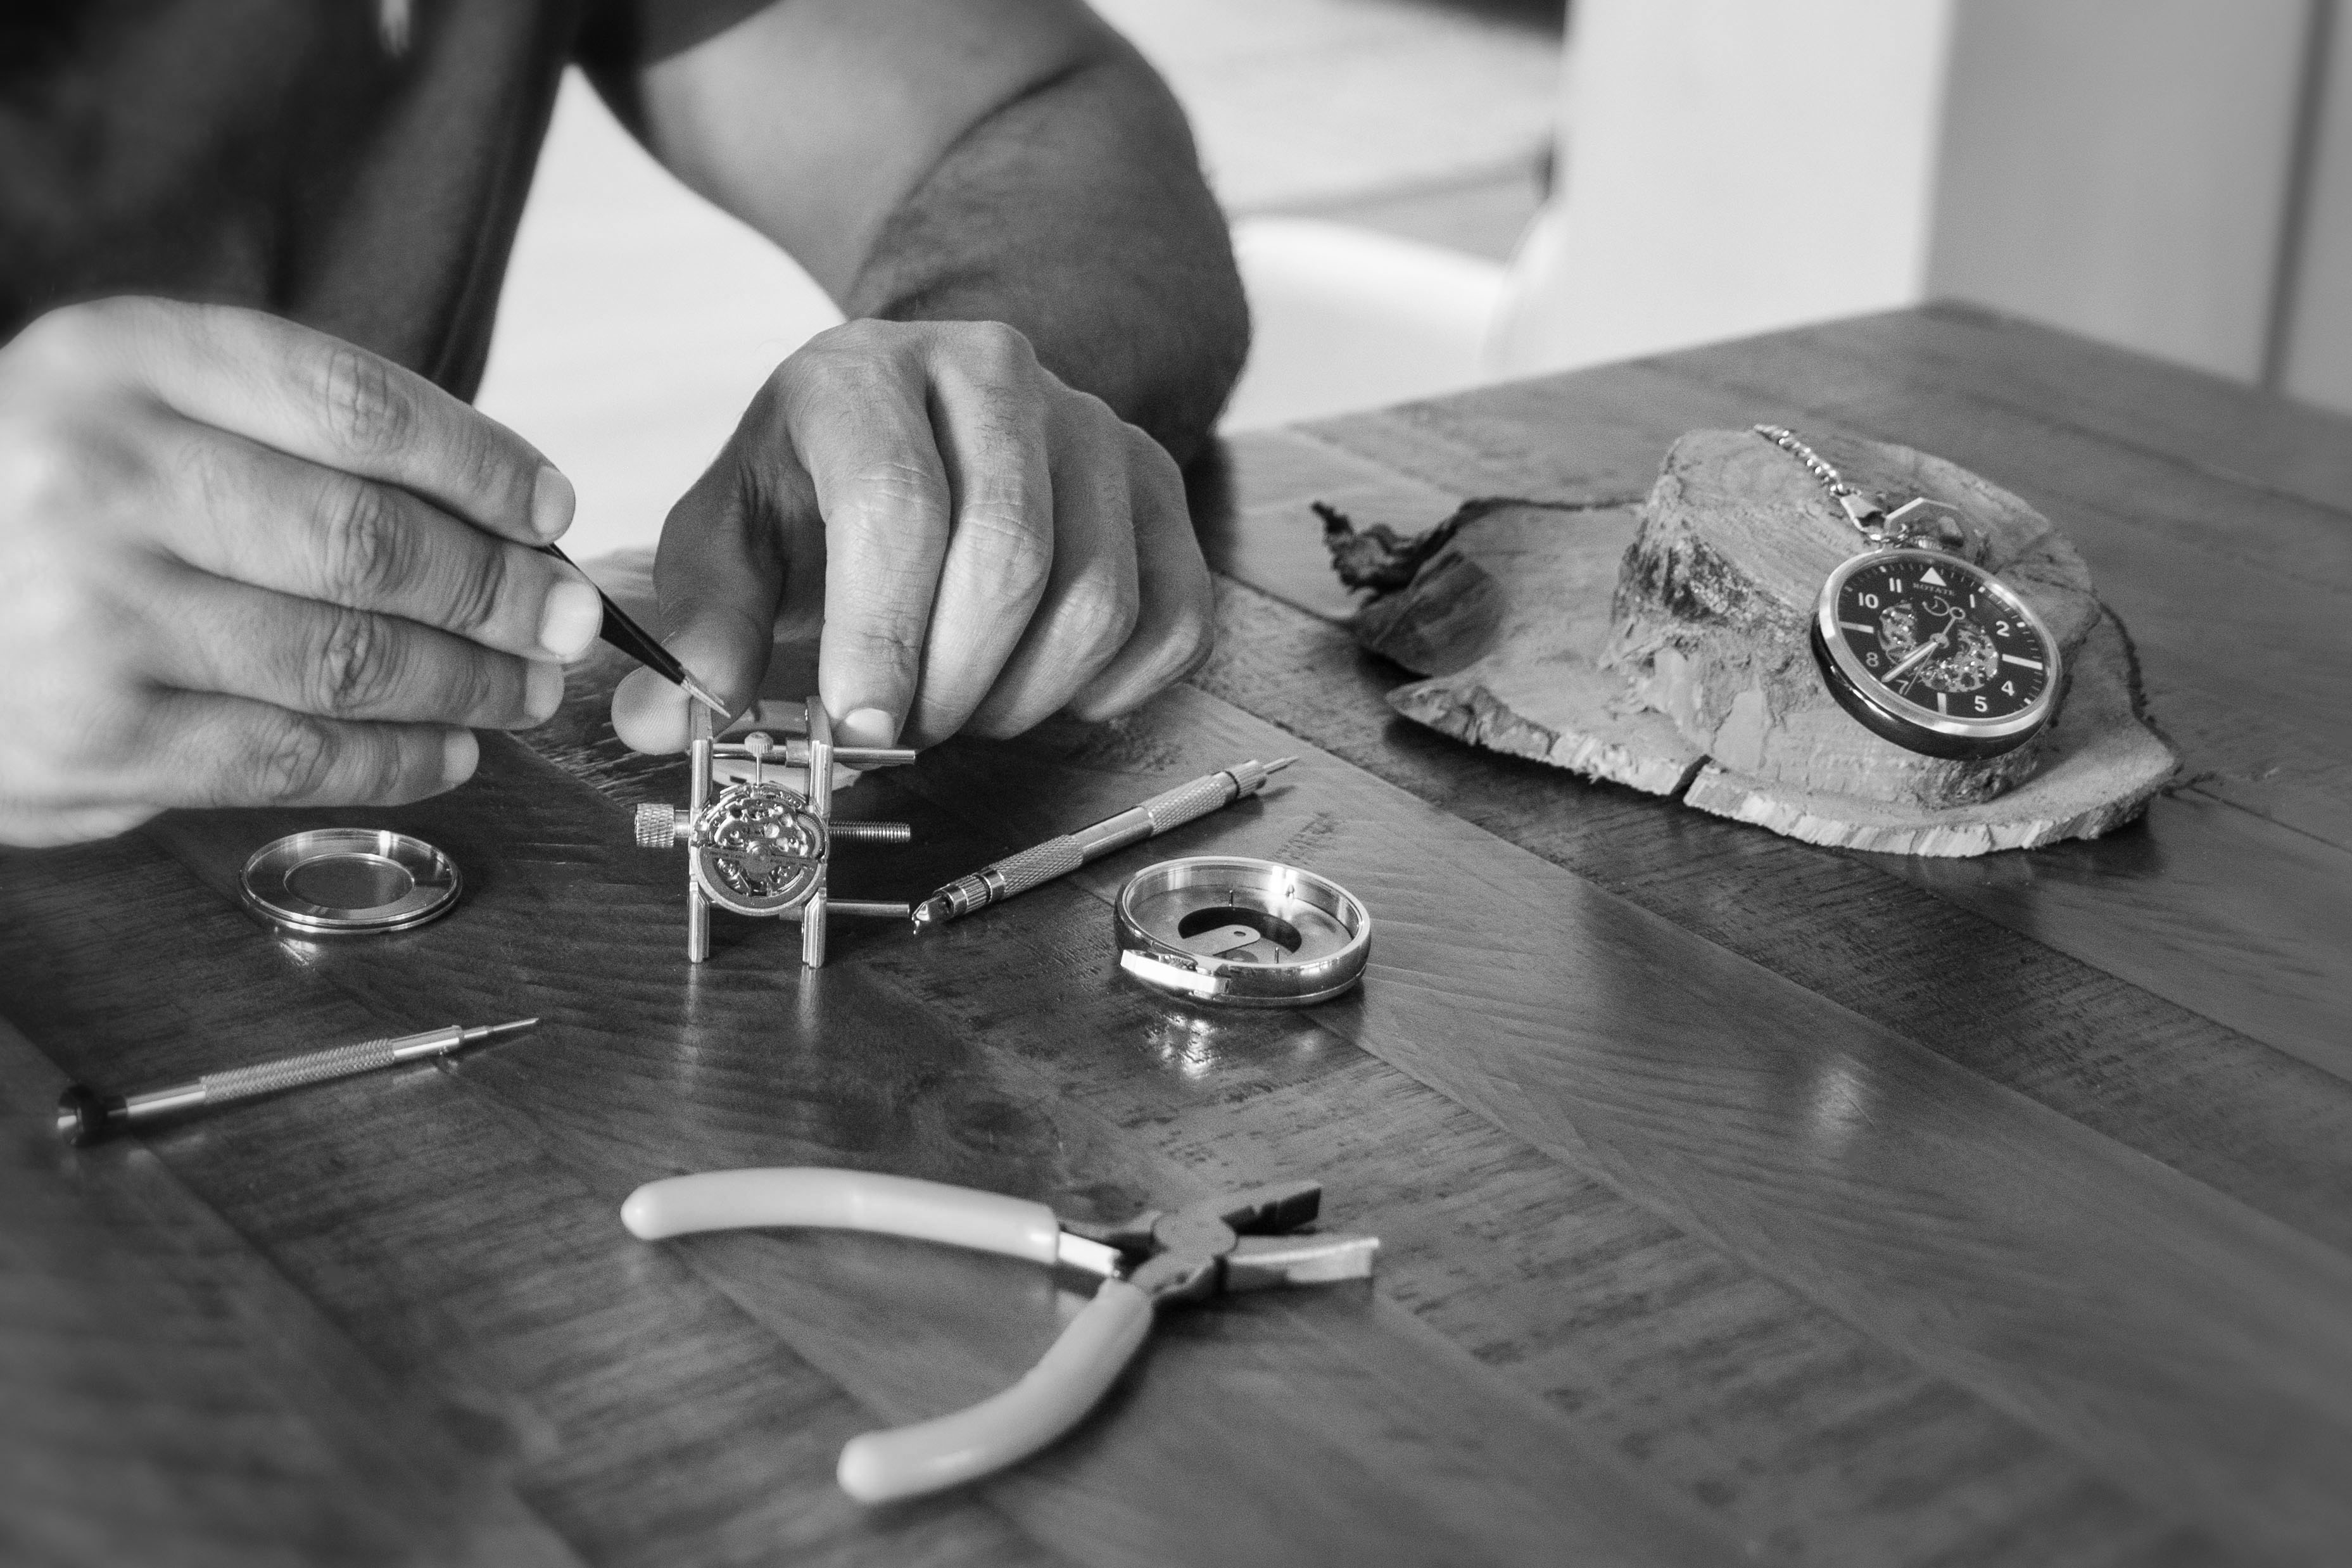 The Anatomy of a Watch: Understanding the Components